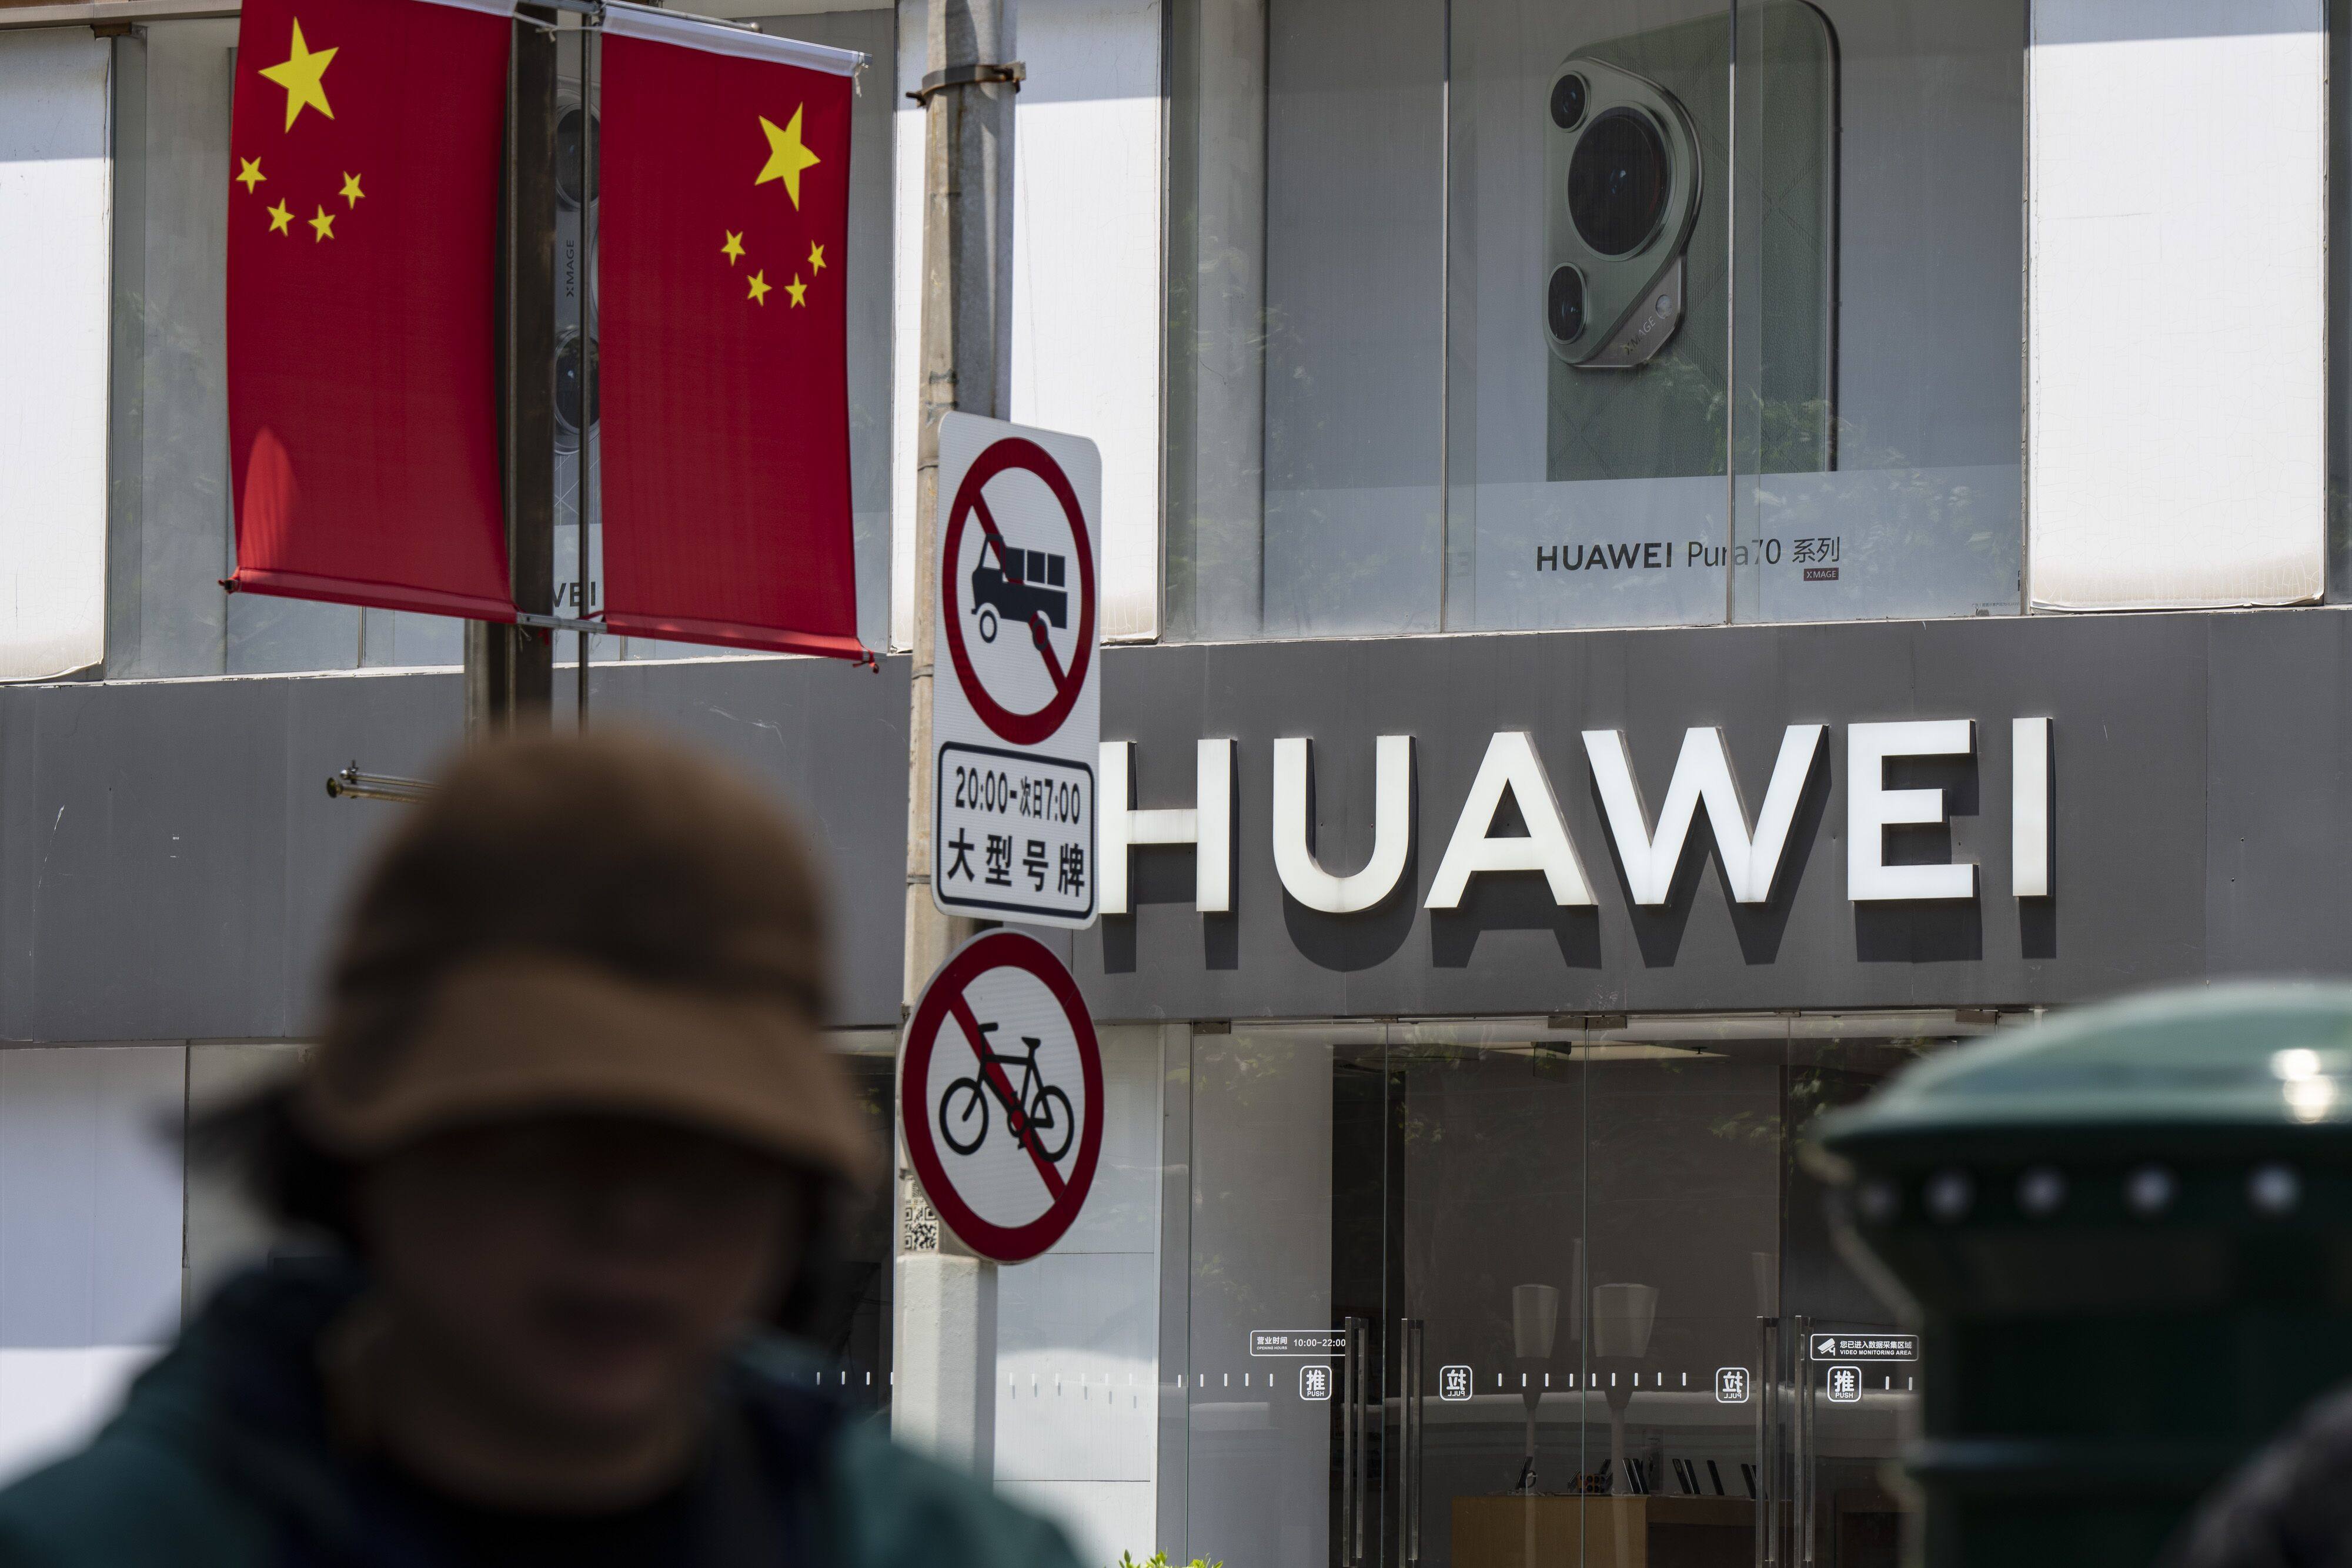 A Huawei store in Shanghai, China. Photo: Bloomberg